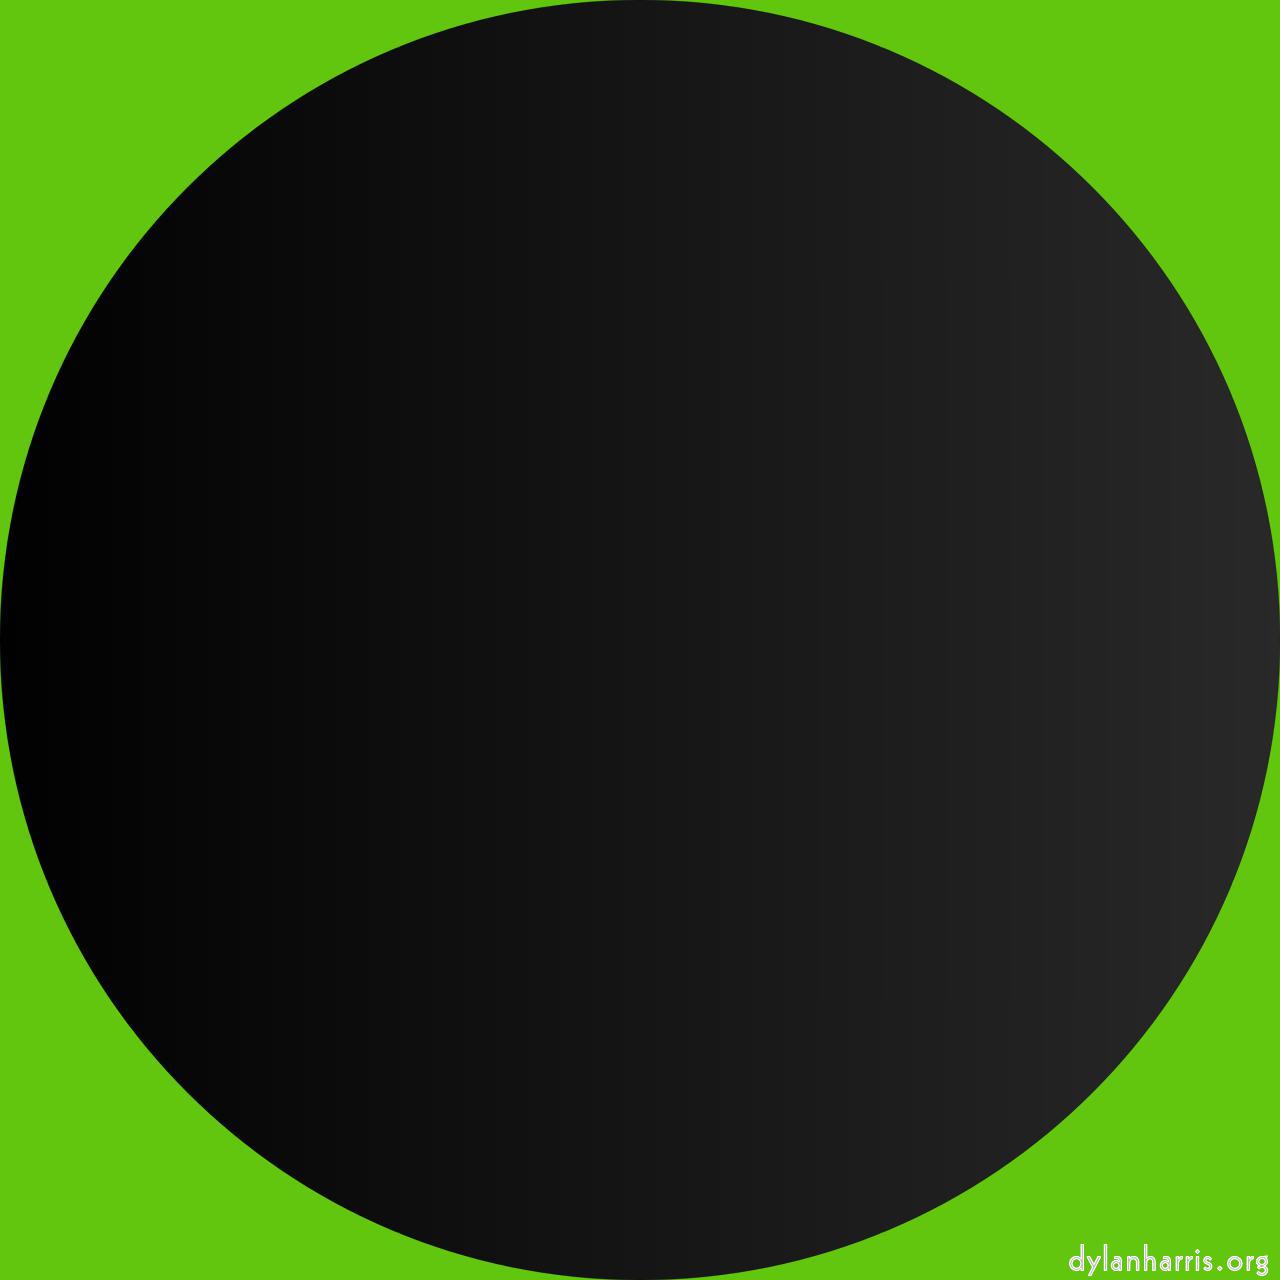 image: gradients :: ellipse with source colour background